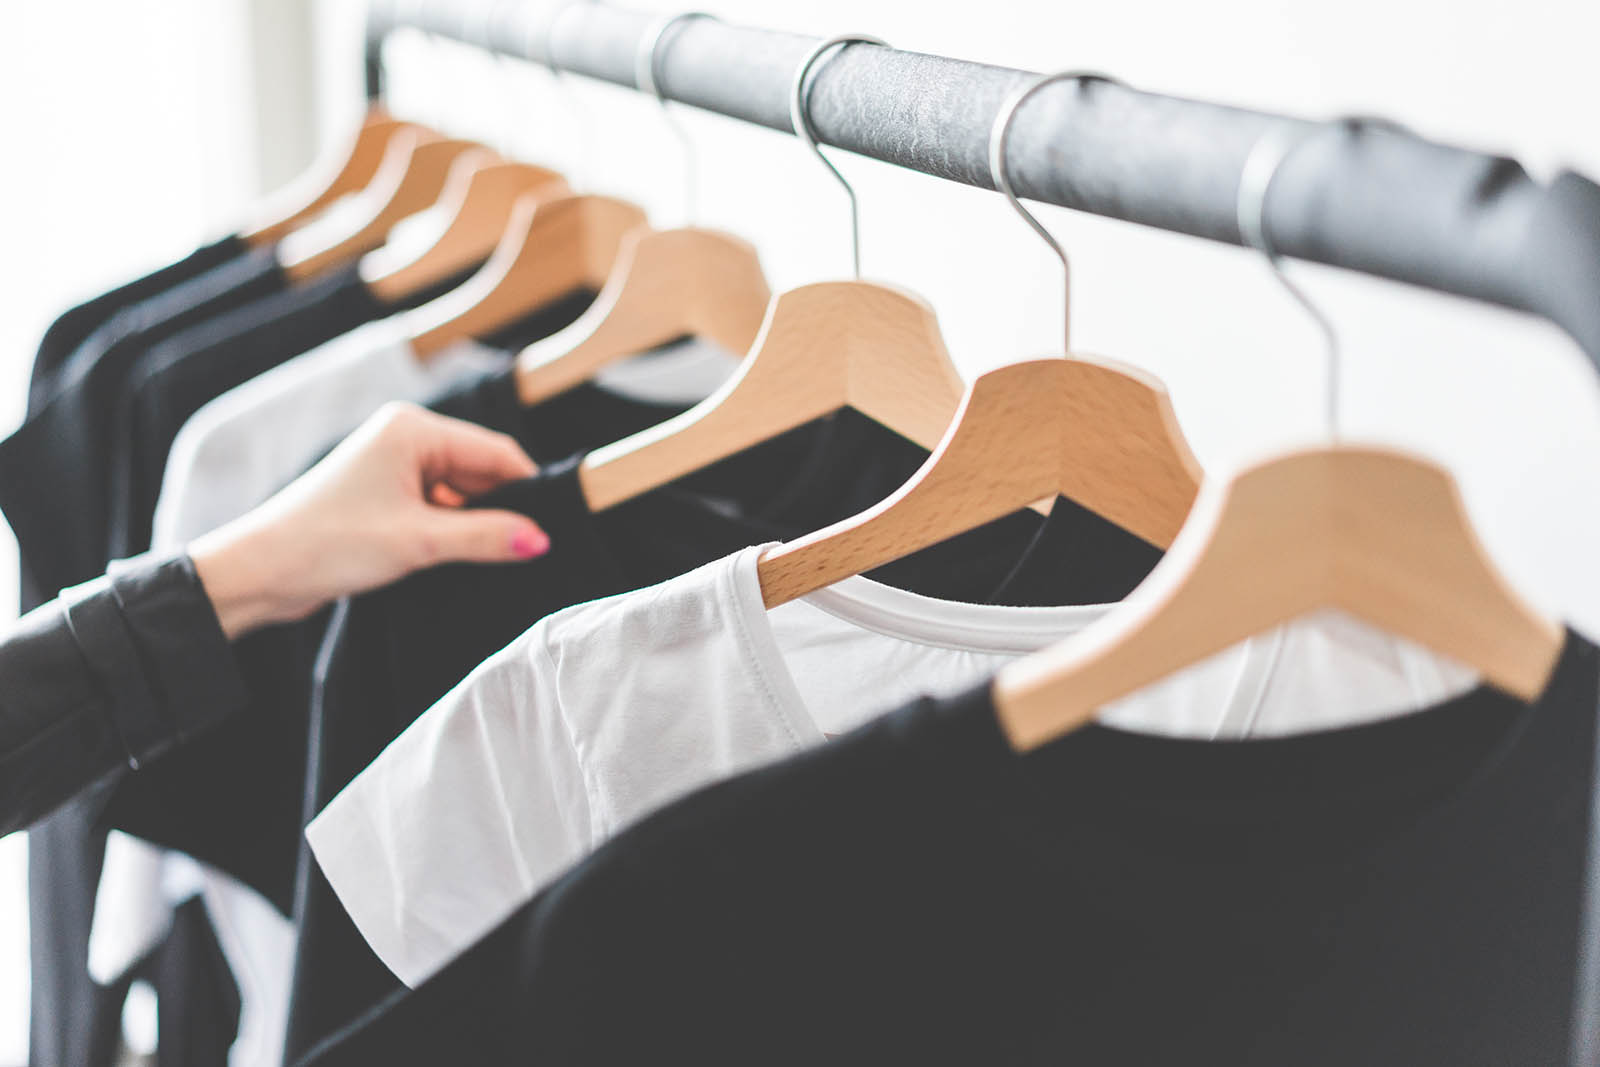 The Beginners Guide to Shopping Sustainably: 5 Questions to Ask ...